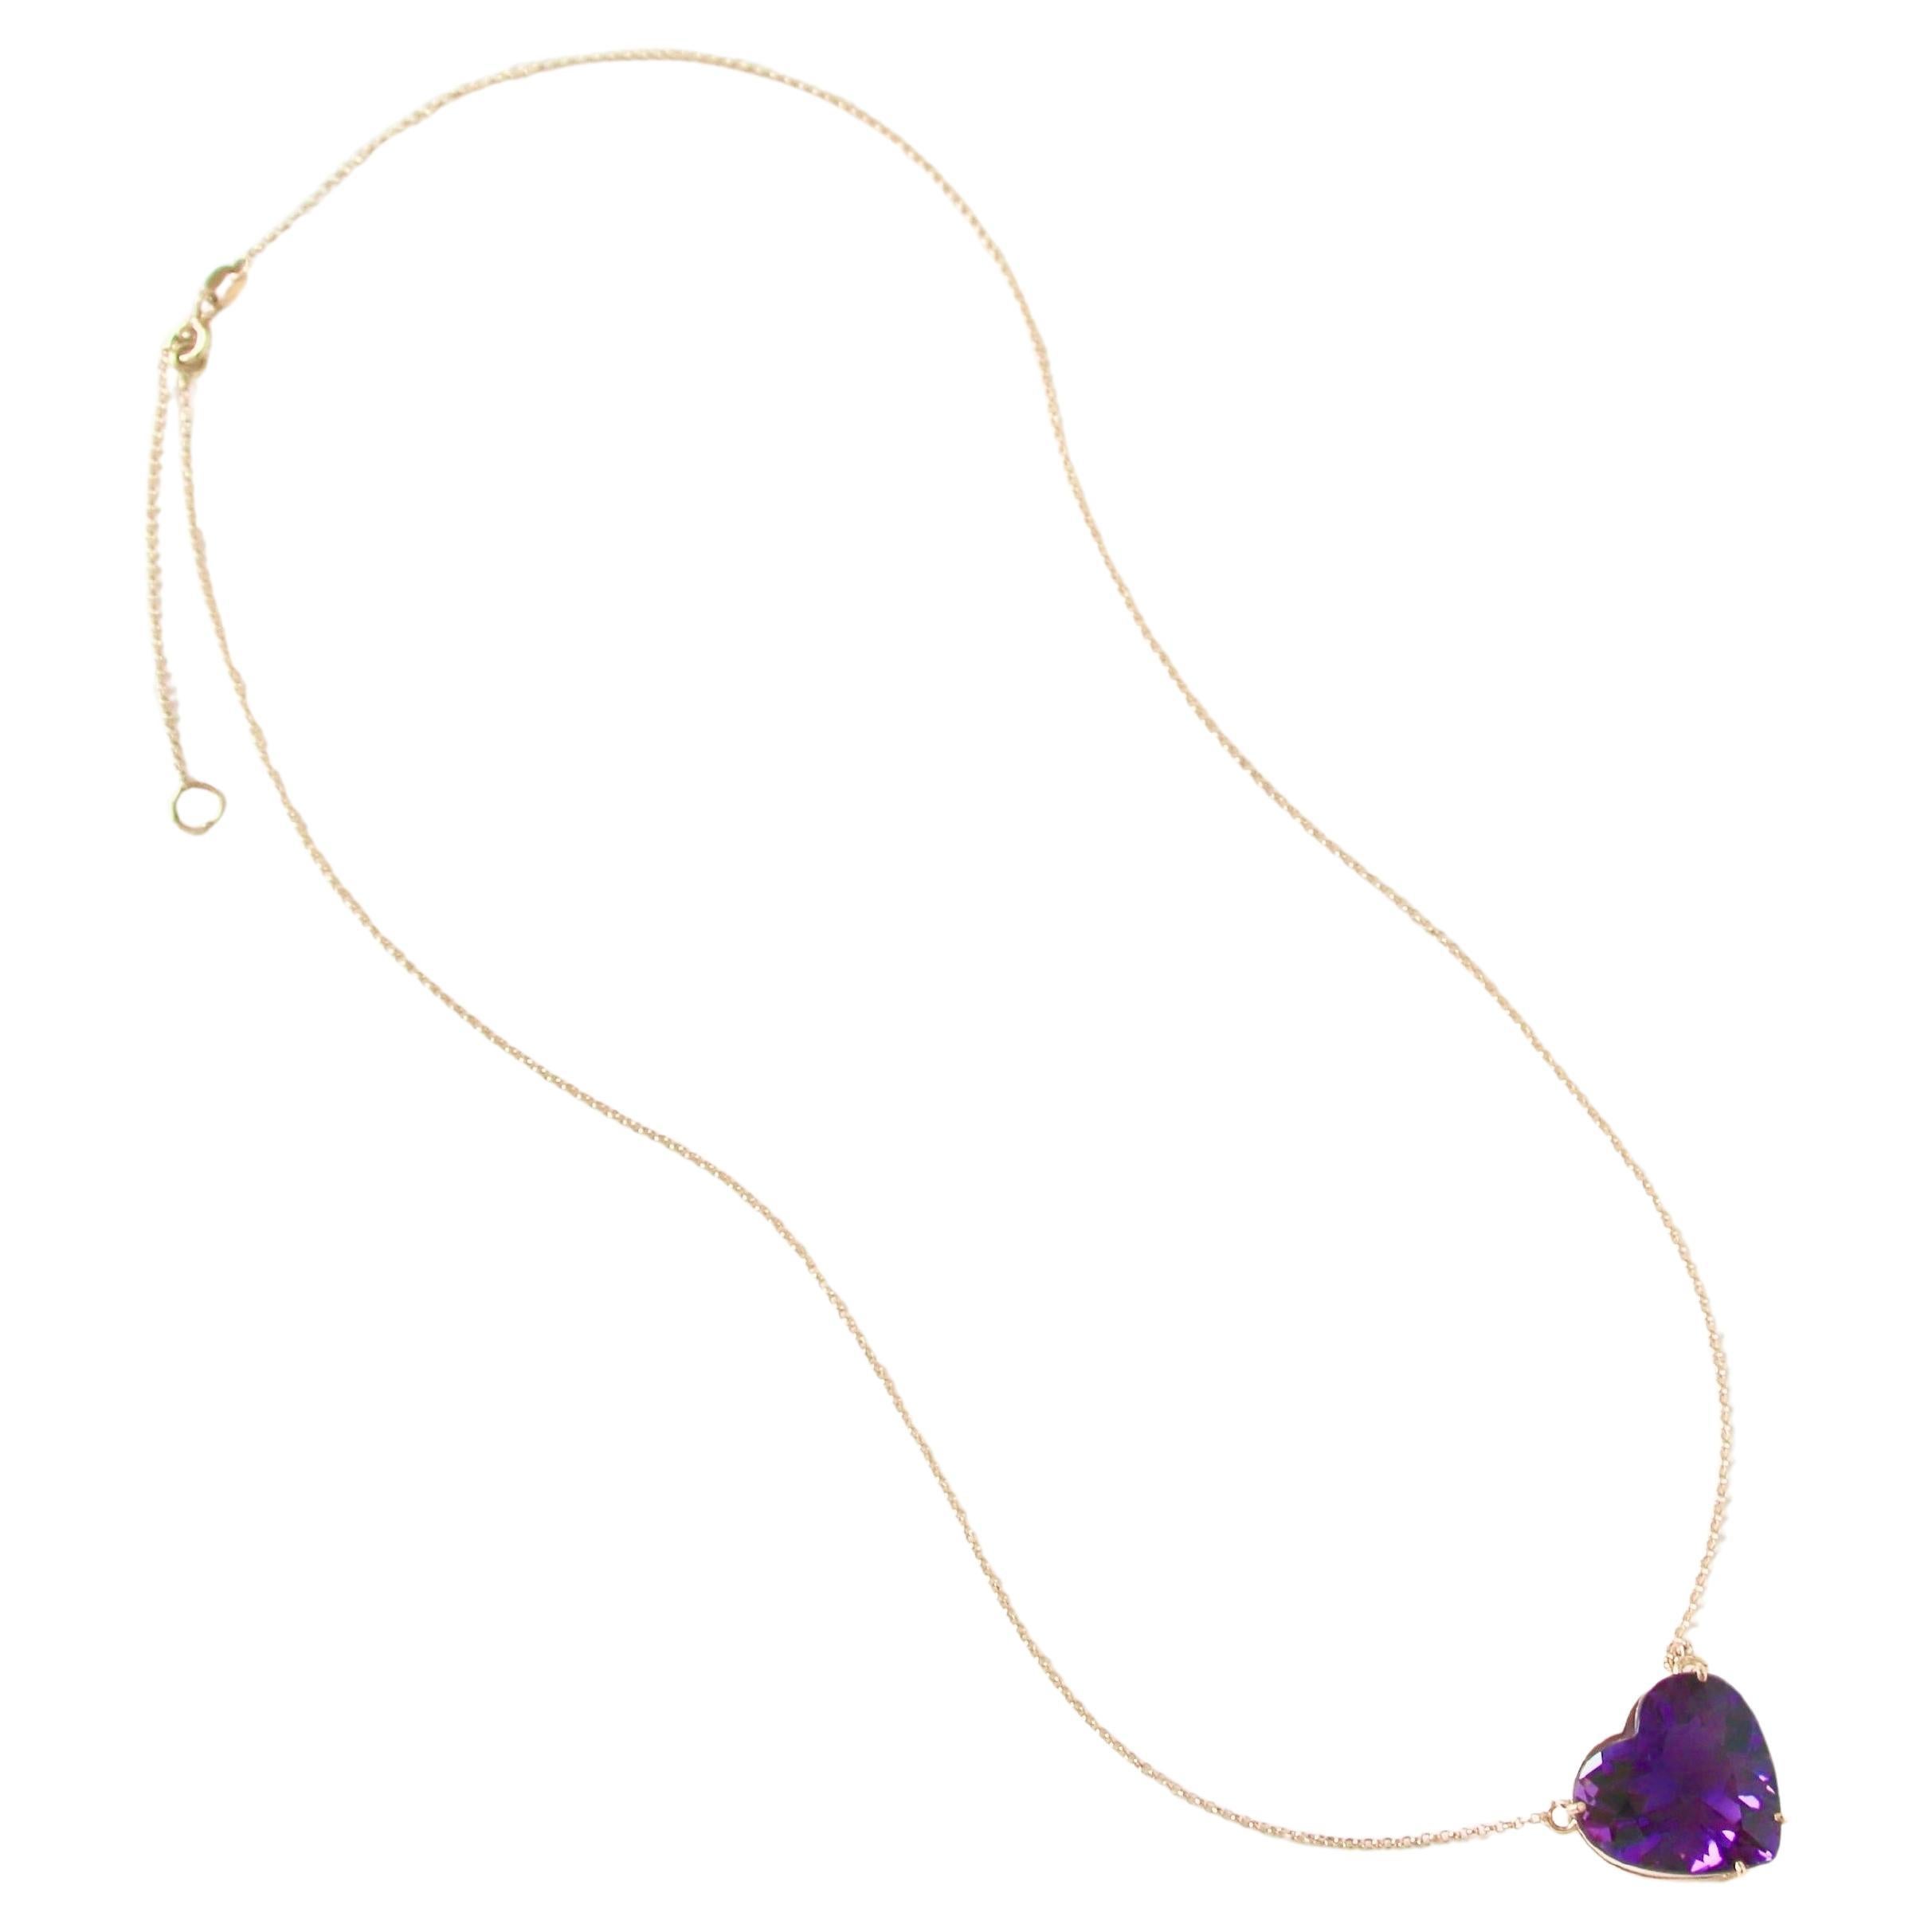 Amethyst Heart Necklace - 18K Yellow Gold 